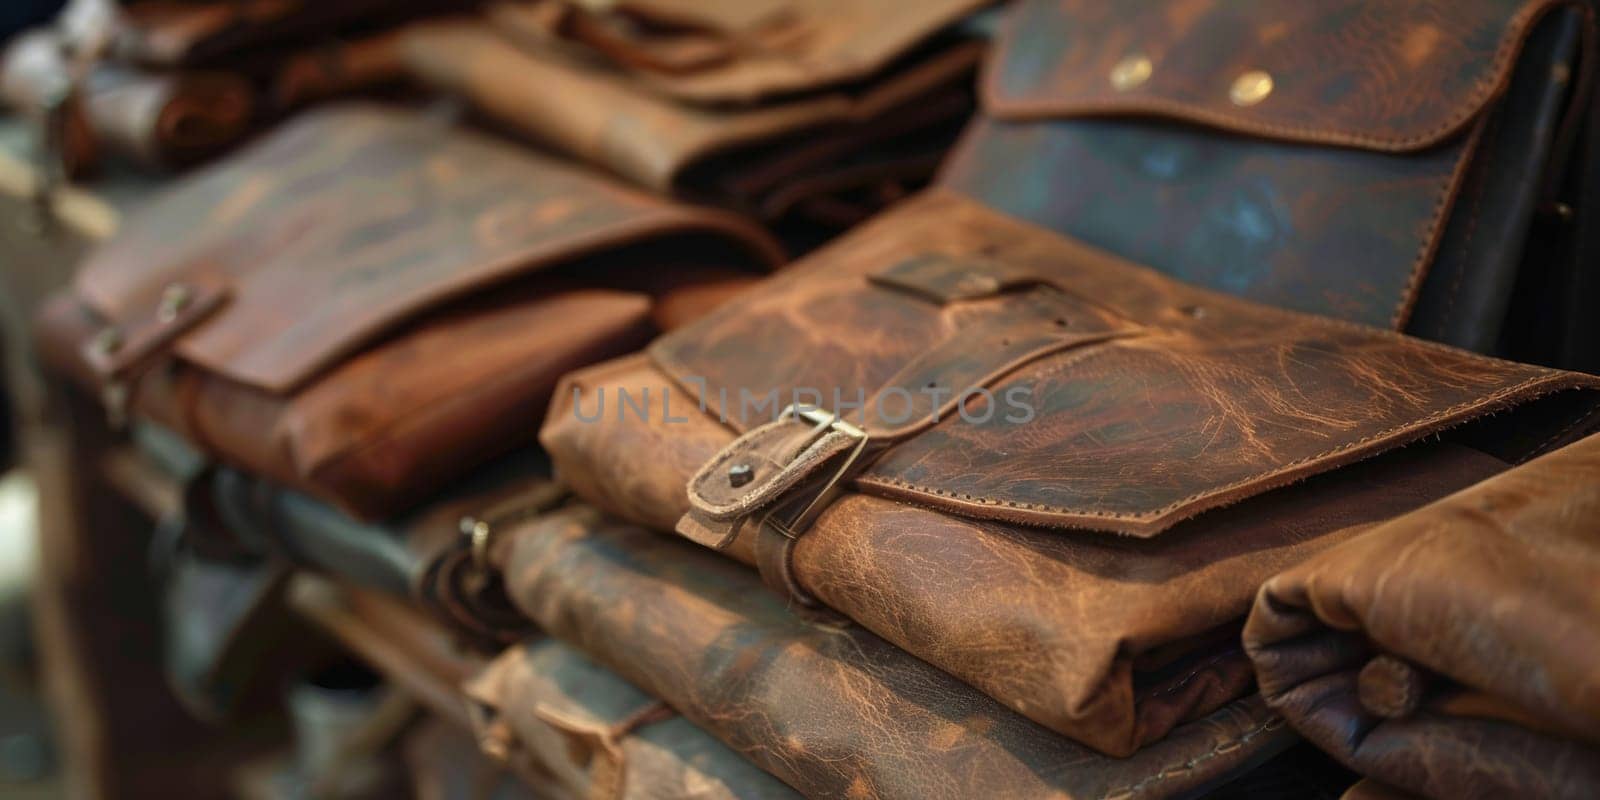 Leatherworking, handcrafted leather goods, such as bags, wallets, or shoes, showcasing the quality craftsmanship by Kadula